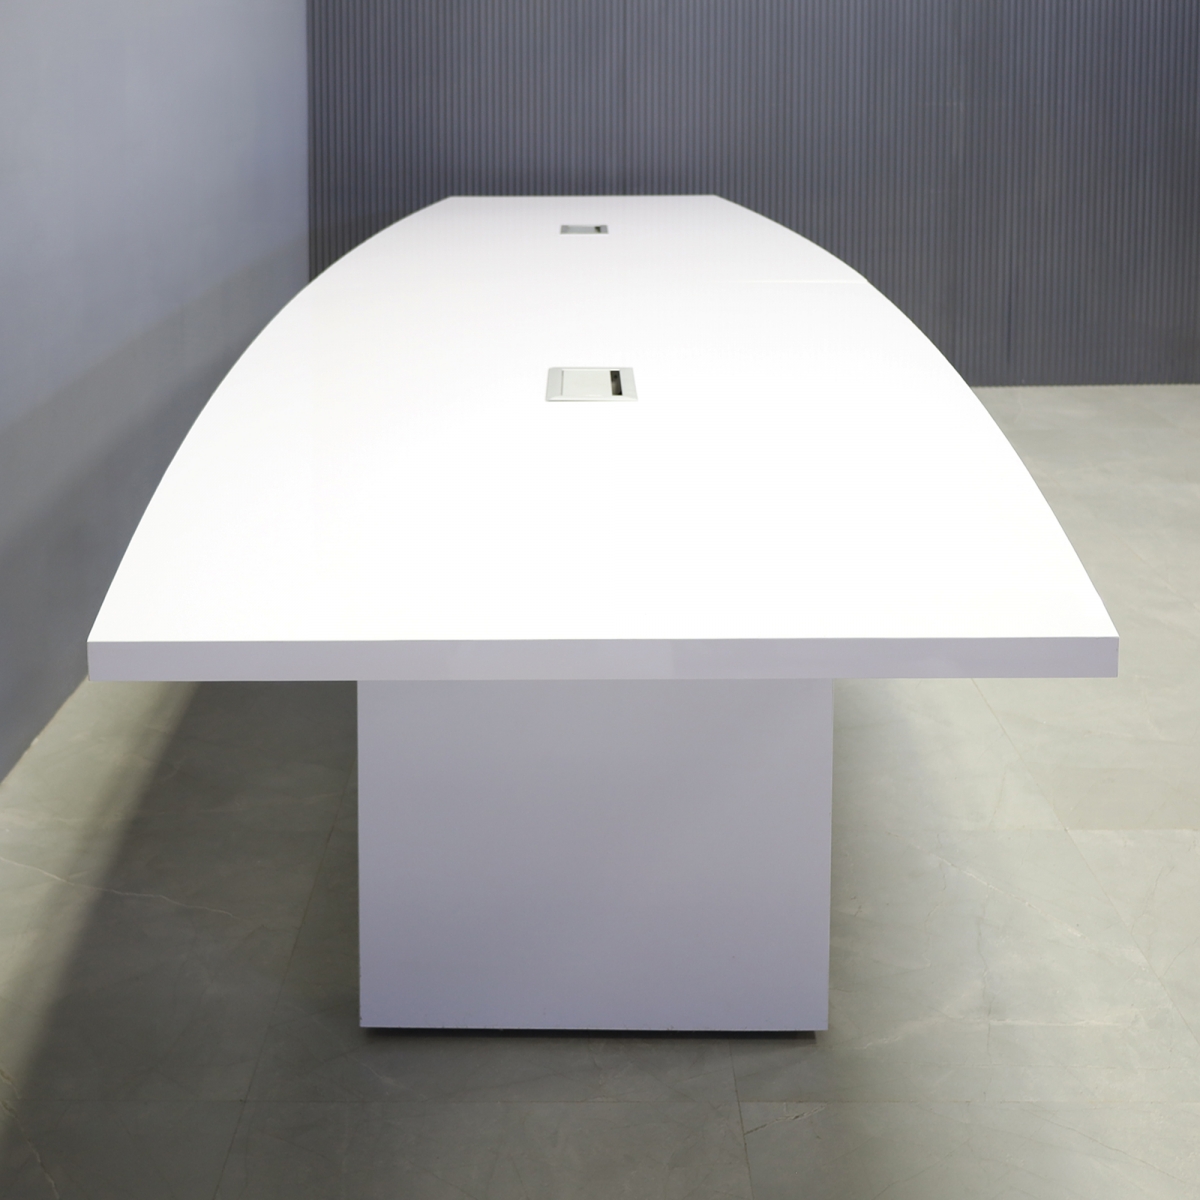 Newton Boat Shape Conference Table in White Gloss Laminate - 144 In. - Stock #58